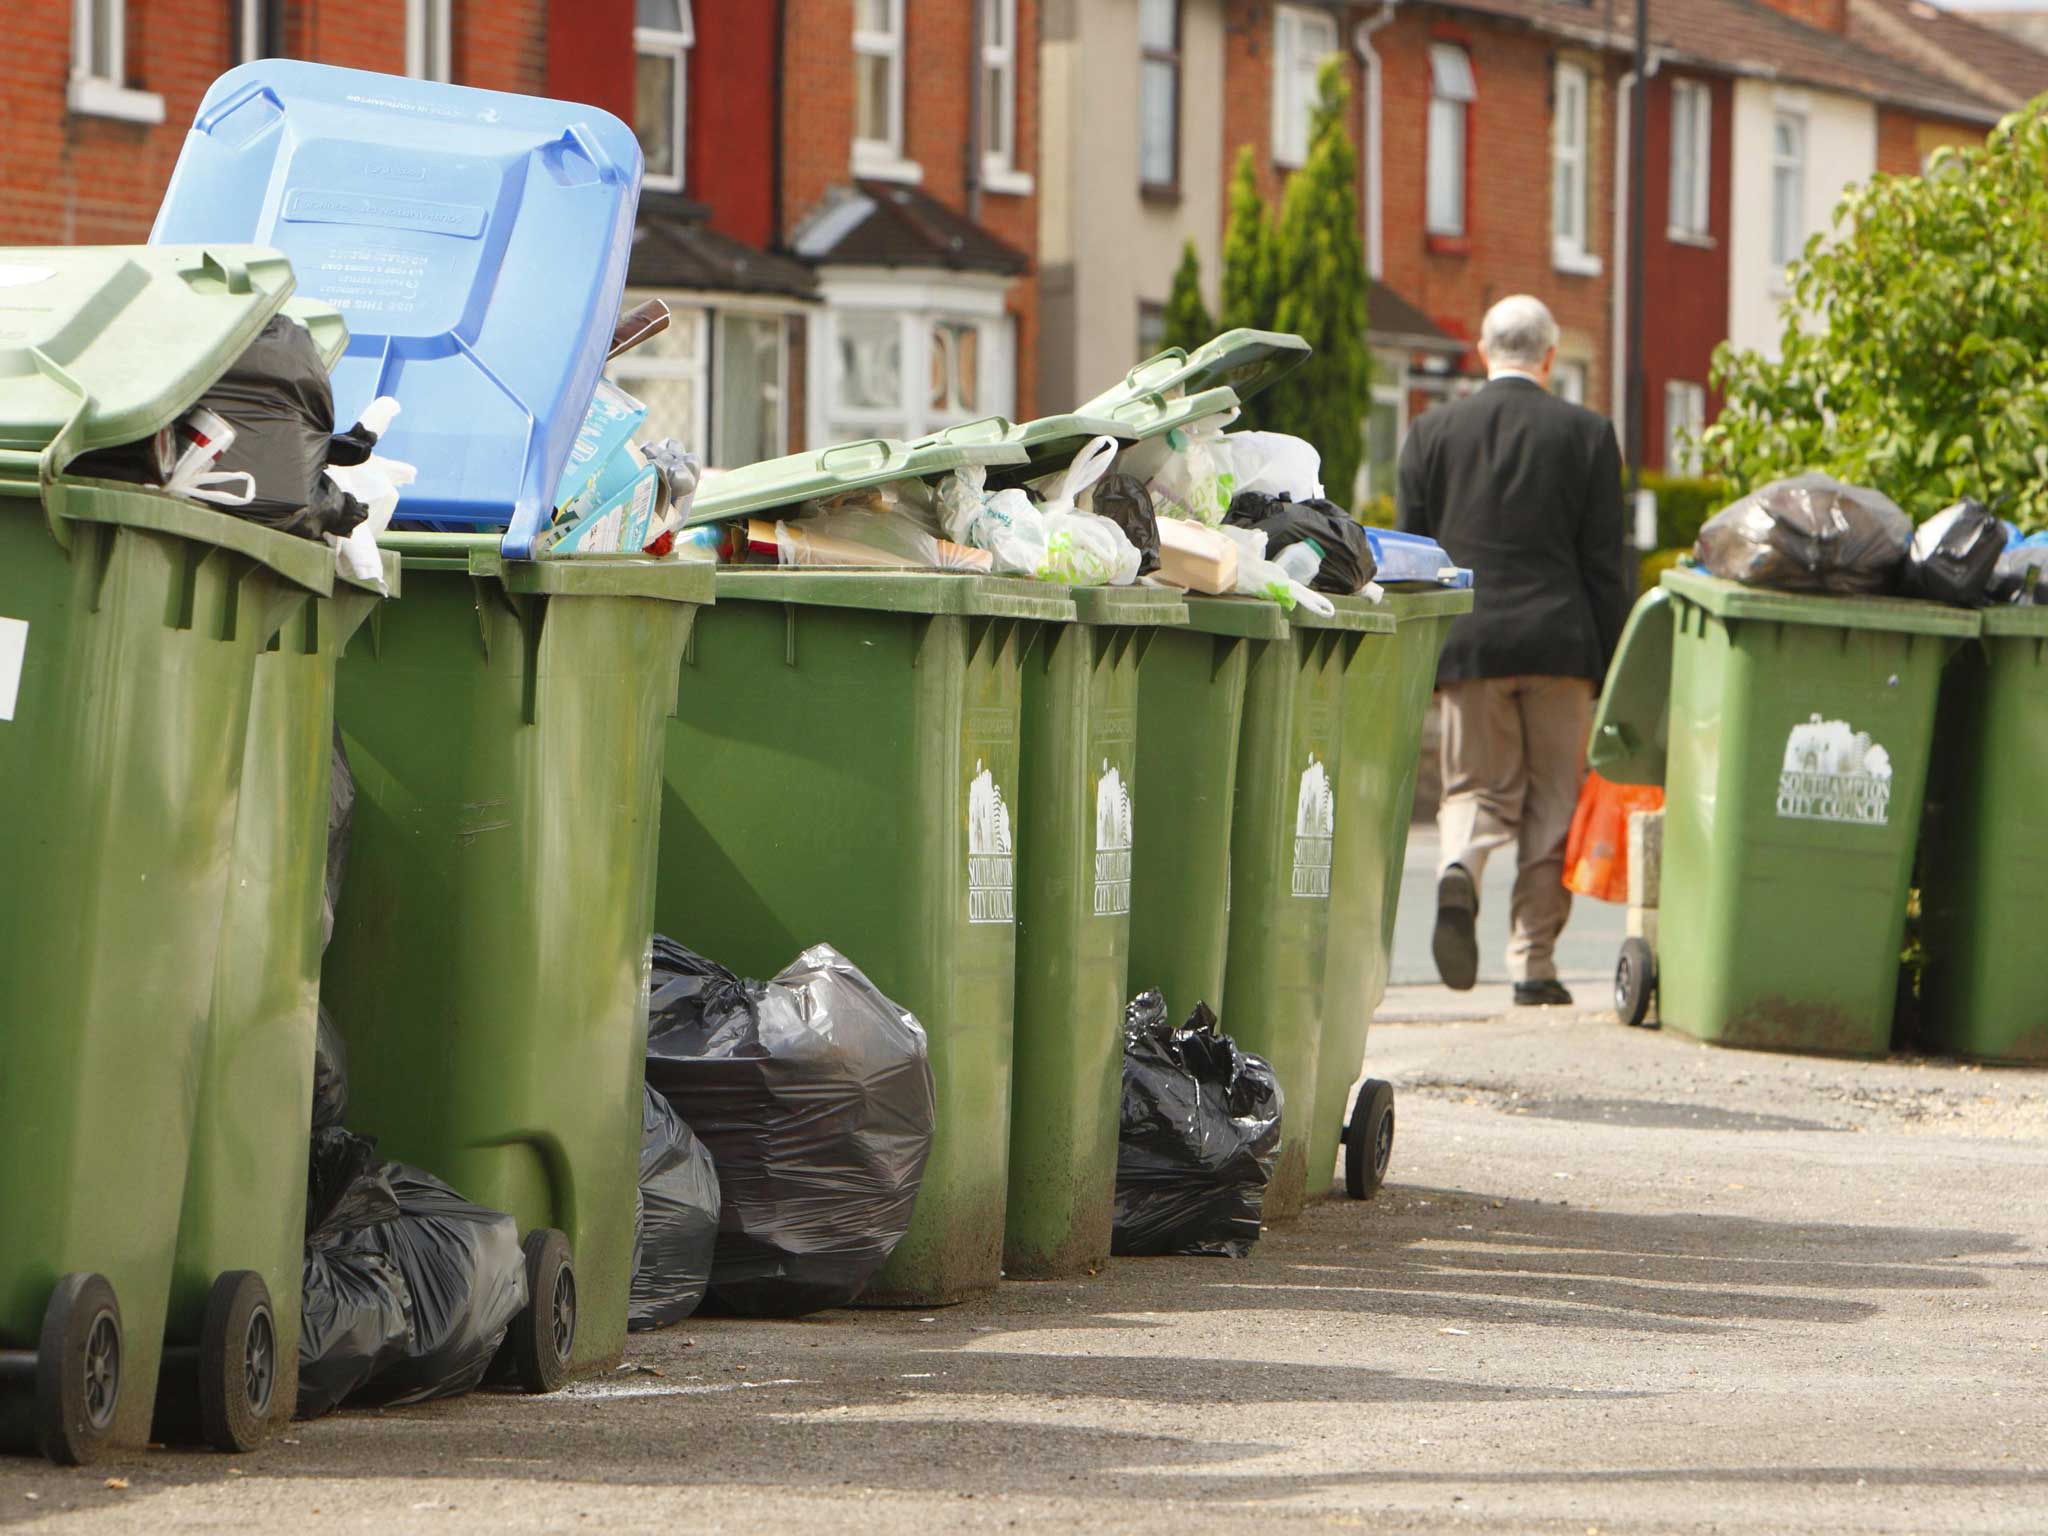 New homes should be built with storage areas for wheelie bins, says Eric Pickles